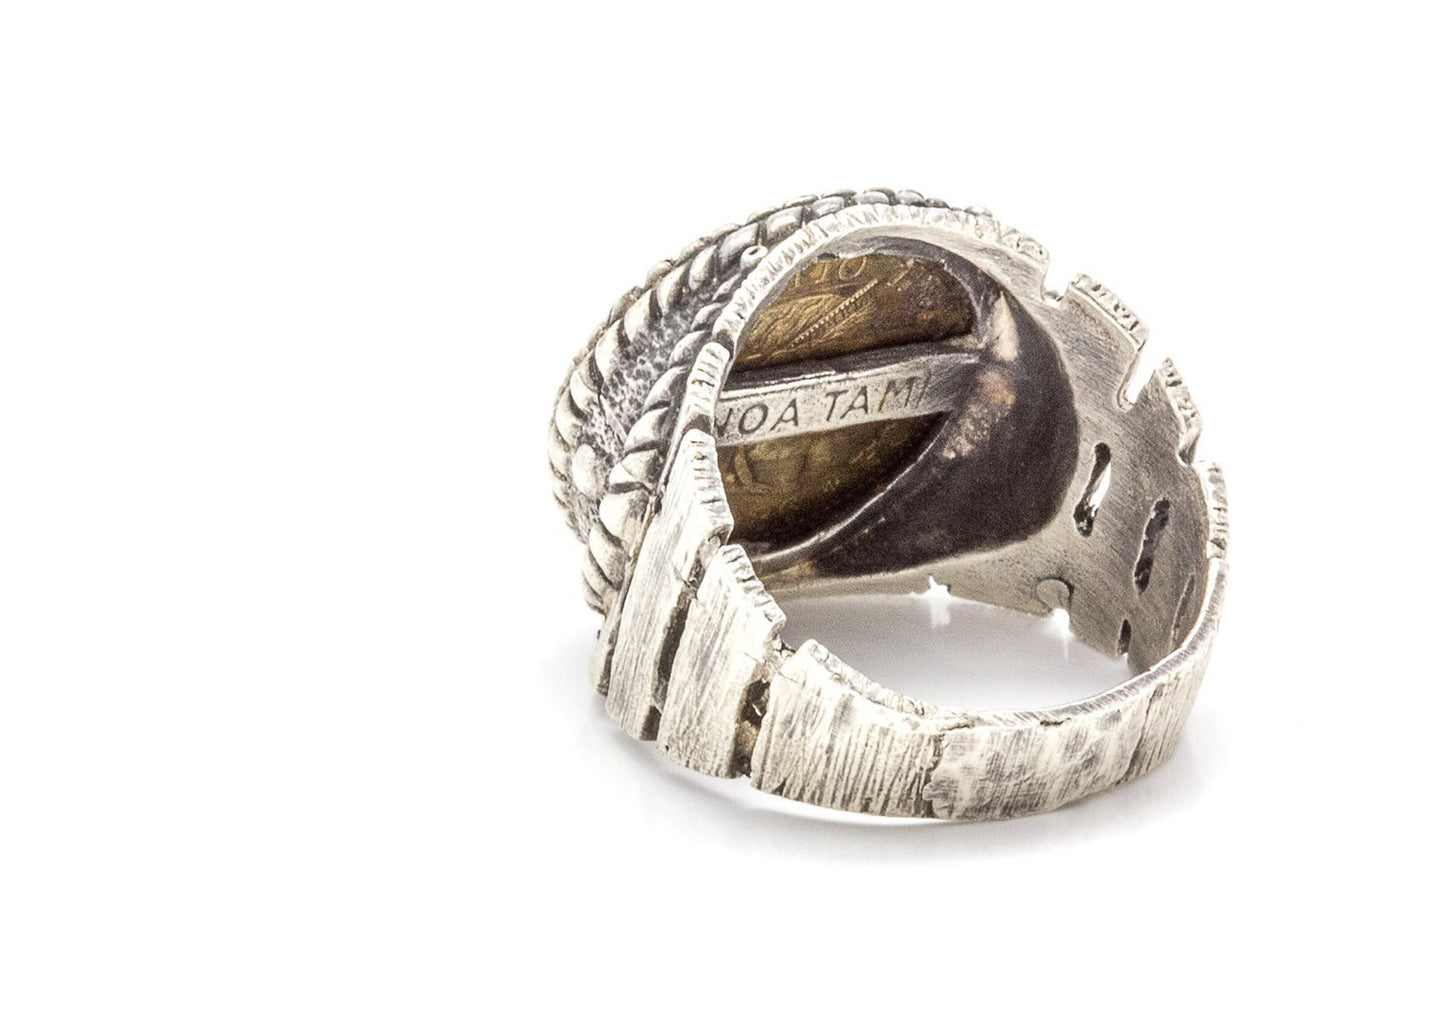 Vintage Ring For Men, Coin of Swiss Ring, Sterling Silver Coin Ring, men's Jewelry, Swiss Coin Jewelry - 5 Rappen Switzerland Coin